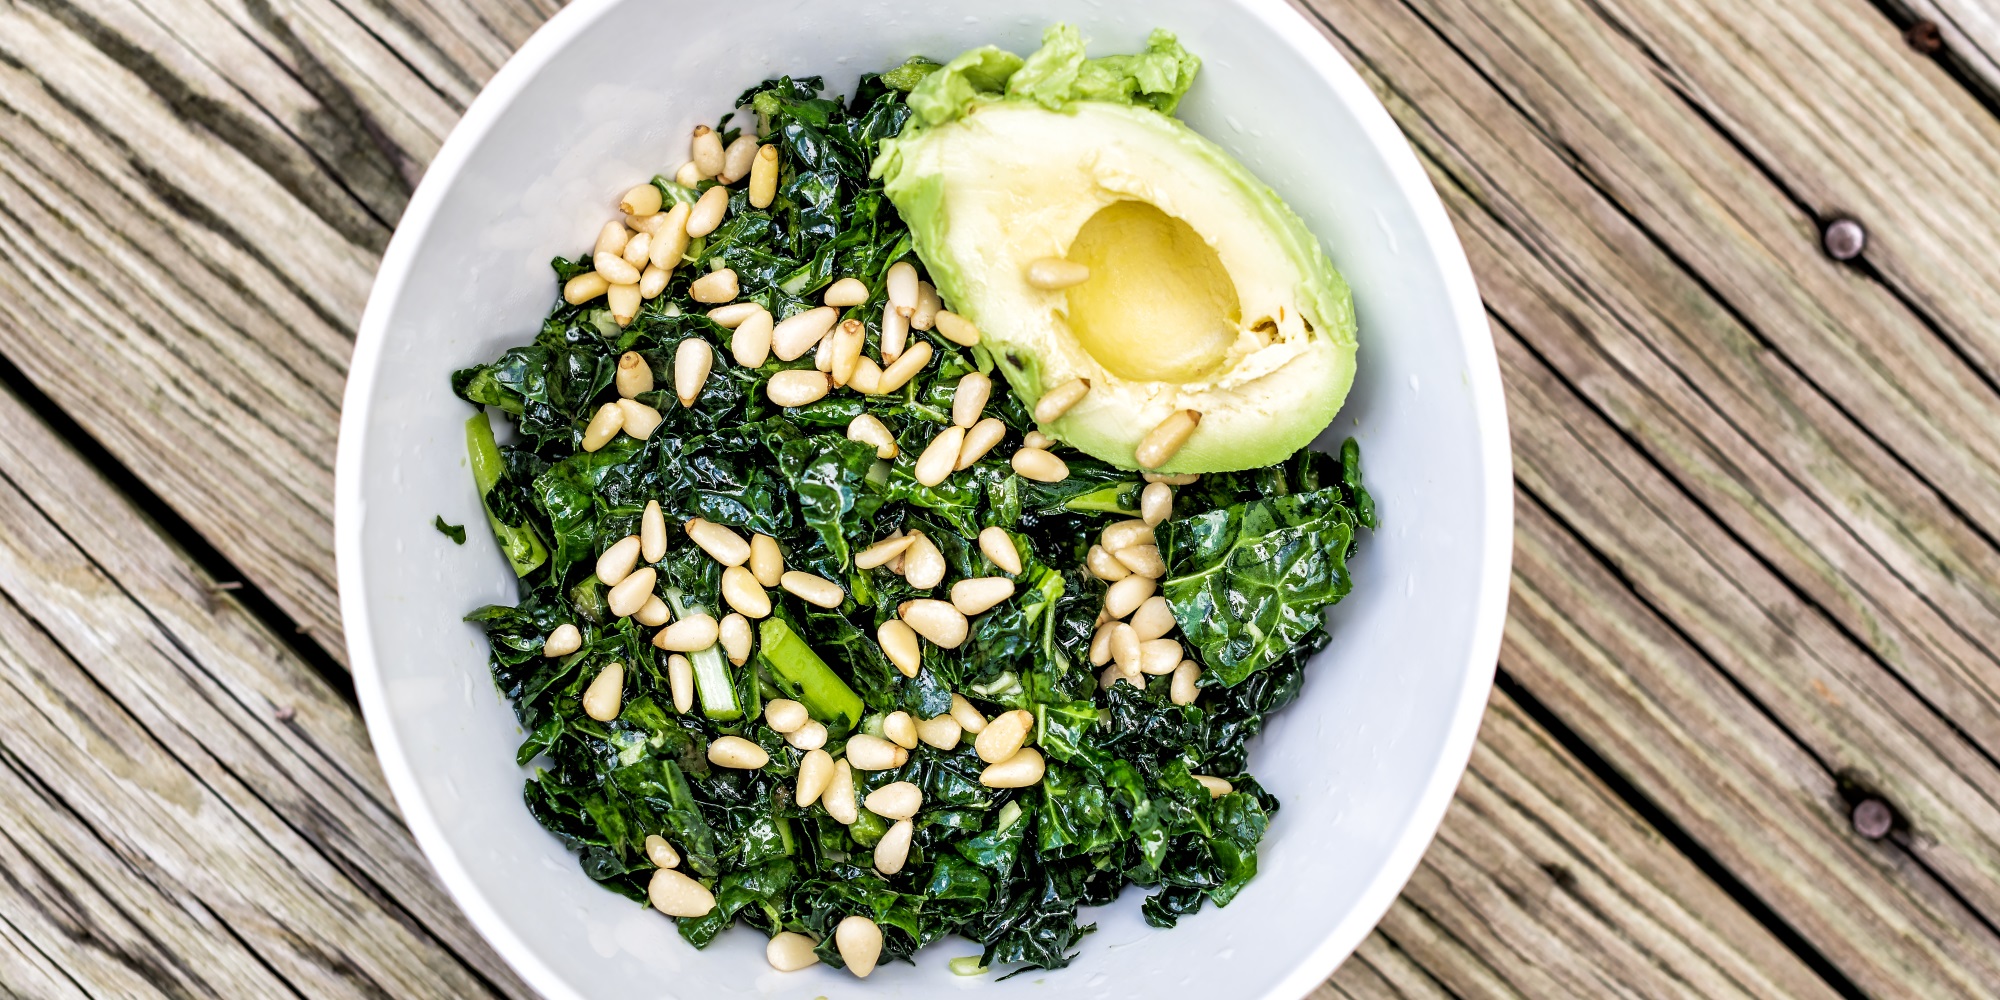 Kale, pine nuts and avocado